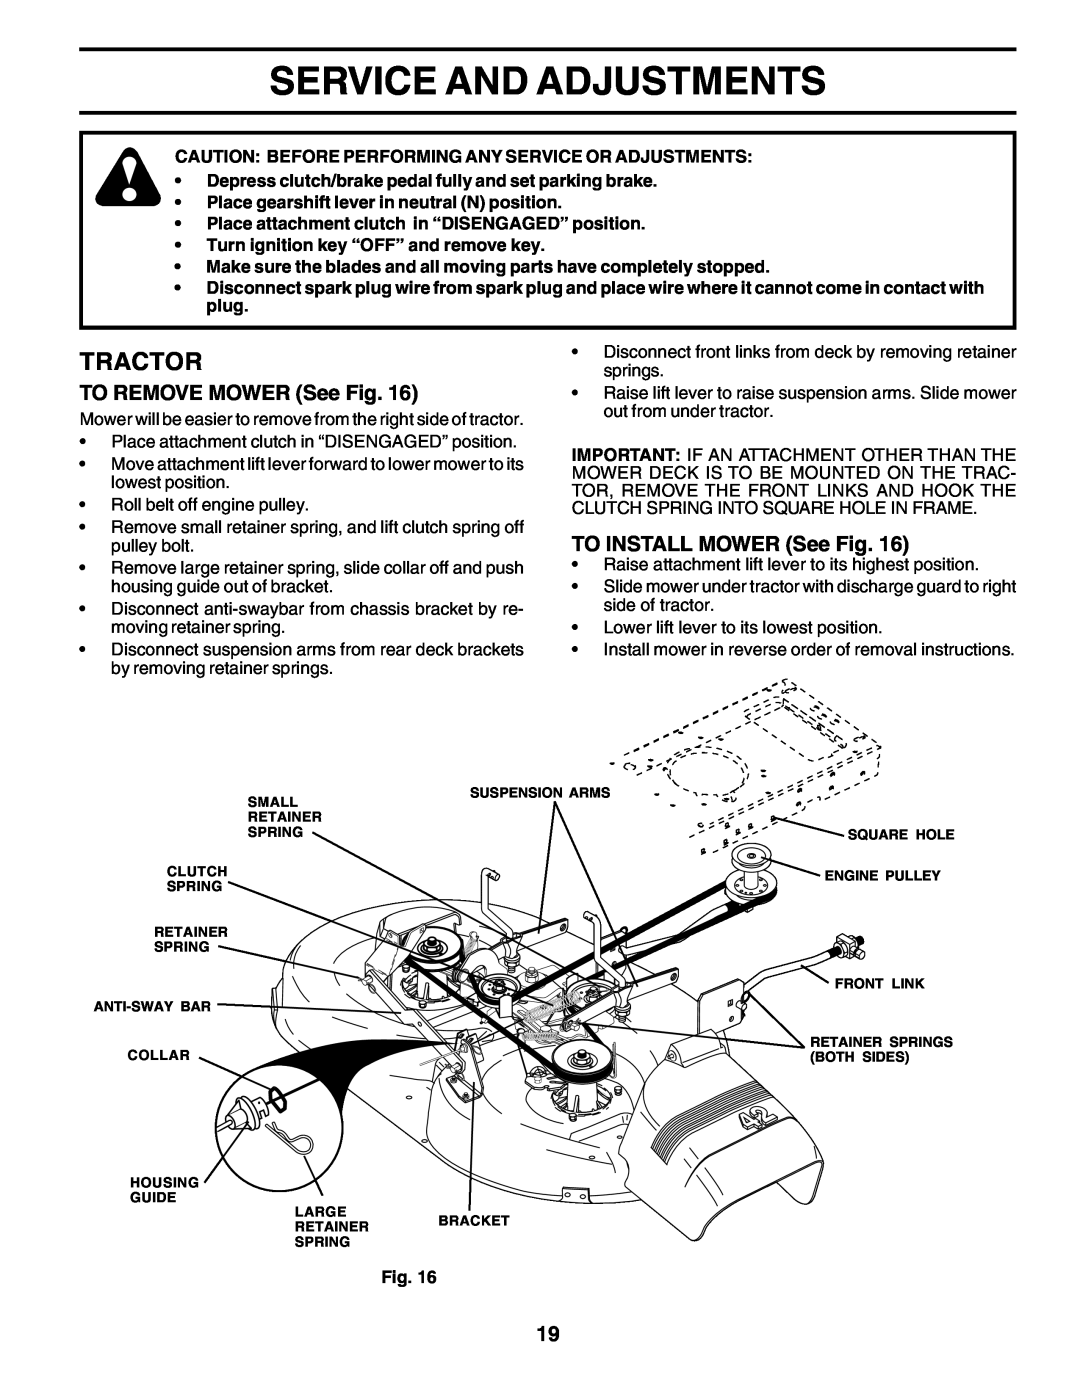 Poulan PO14542D manual Service And Adjustments, Tractor, TO REMOVE MOWER See Fig, TO INSTALL MOWER See Fig 